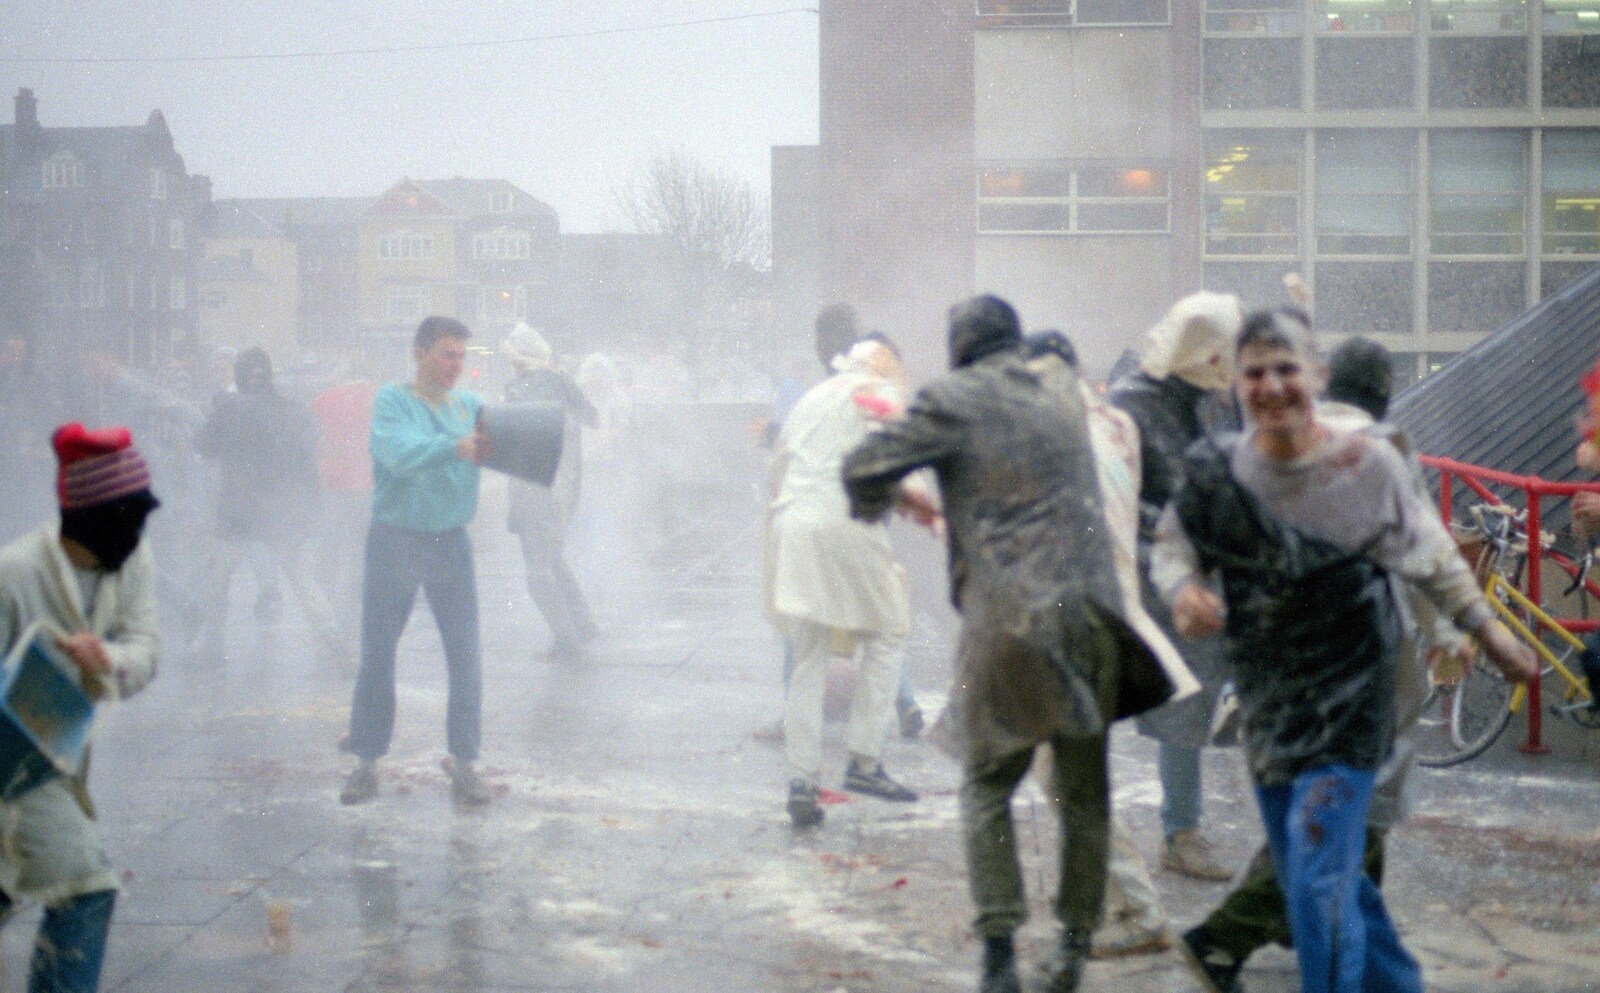 All-out flour war from Uni: The Pirate RAG Hit Squad, Plymouth Polytechnic, Devon - 8th February 1987